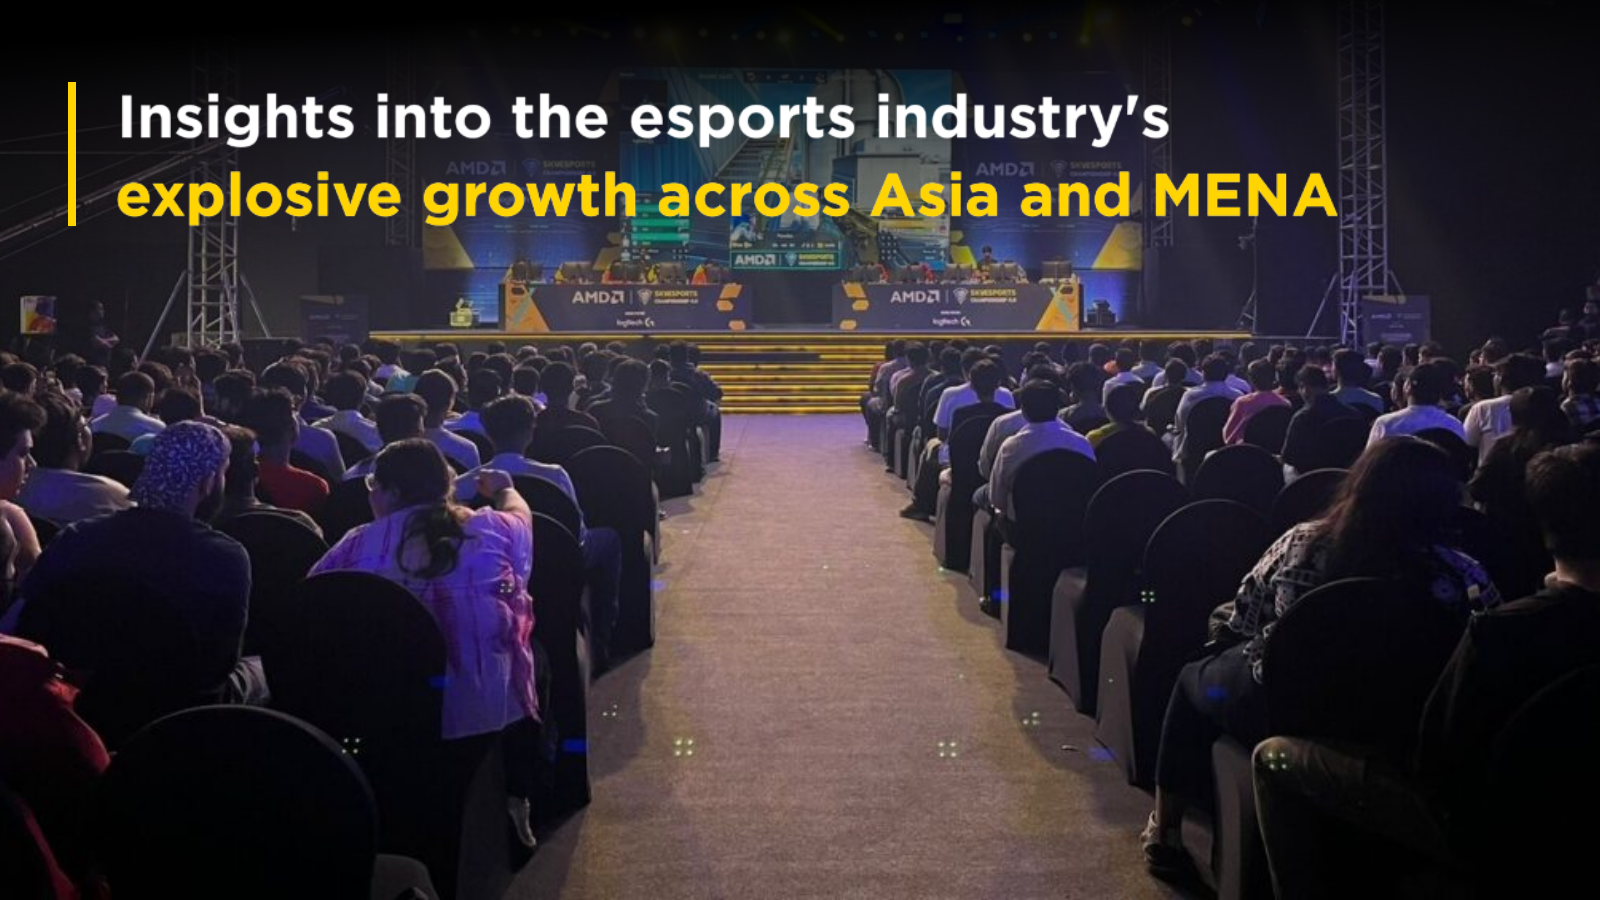 Esports Revenue Soars: 5 Key Findings from Niko Partners Report on Asia and MENA Dominance